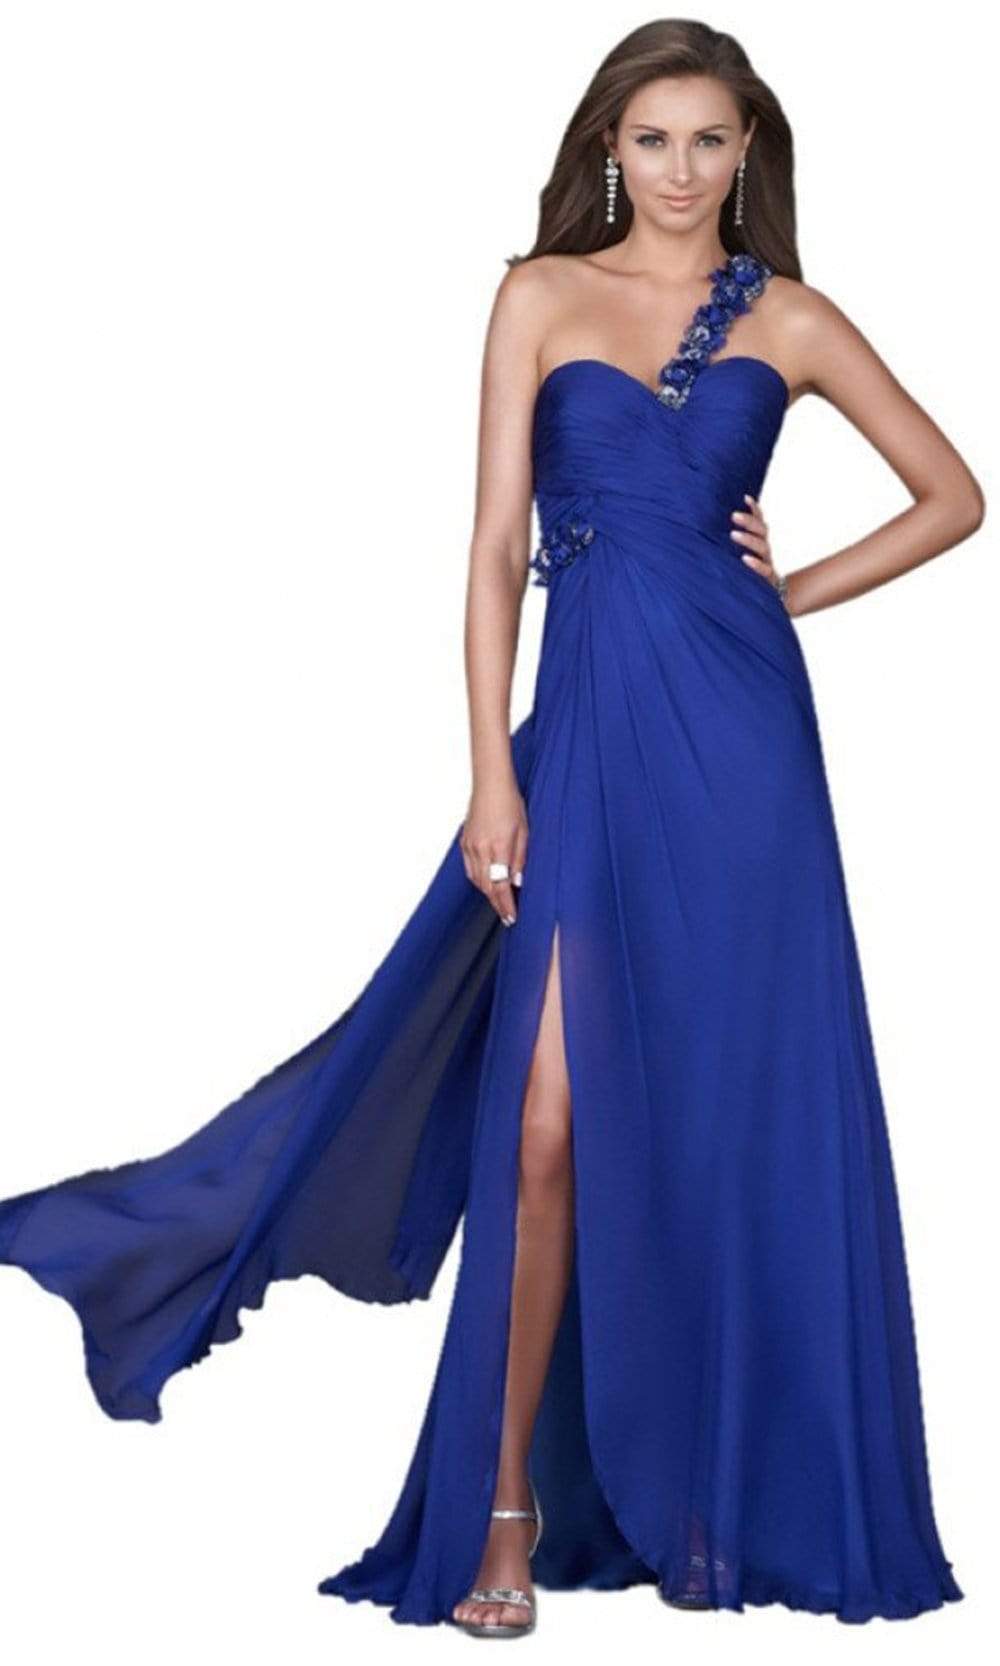 La Femme - 16659 One Shoulder Braded Strap Sweetheart Evening Gown Special Occasion Dress